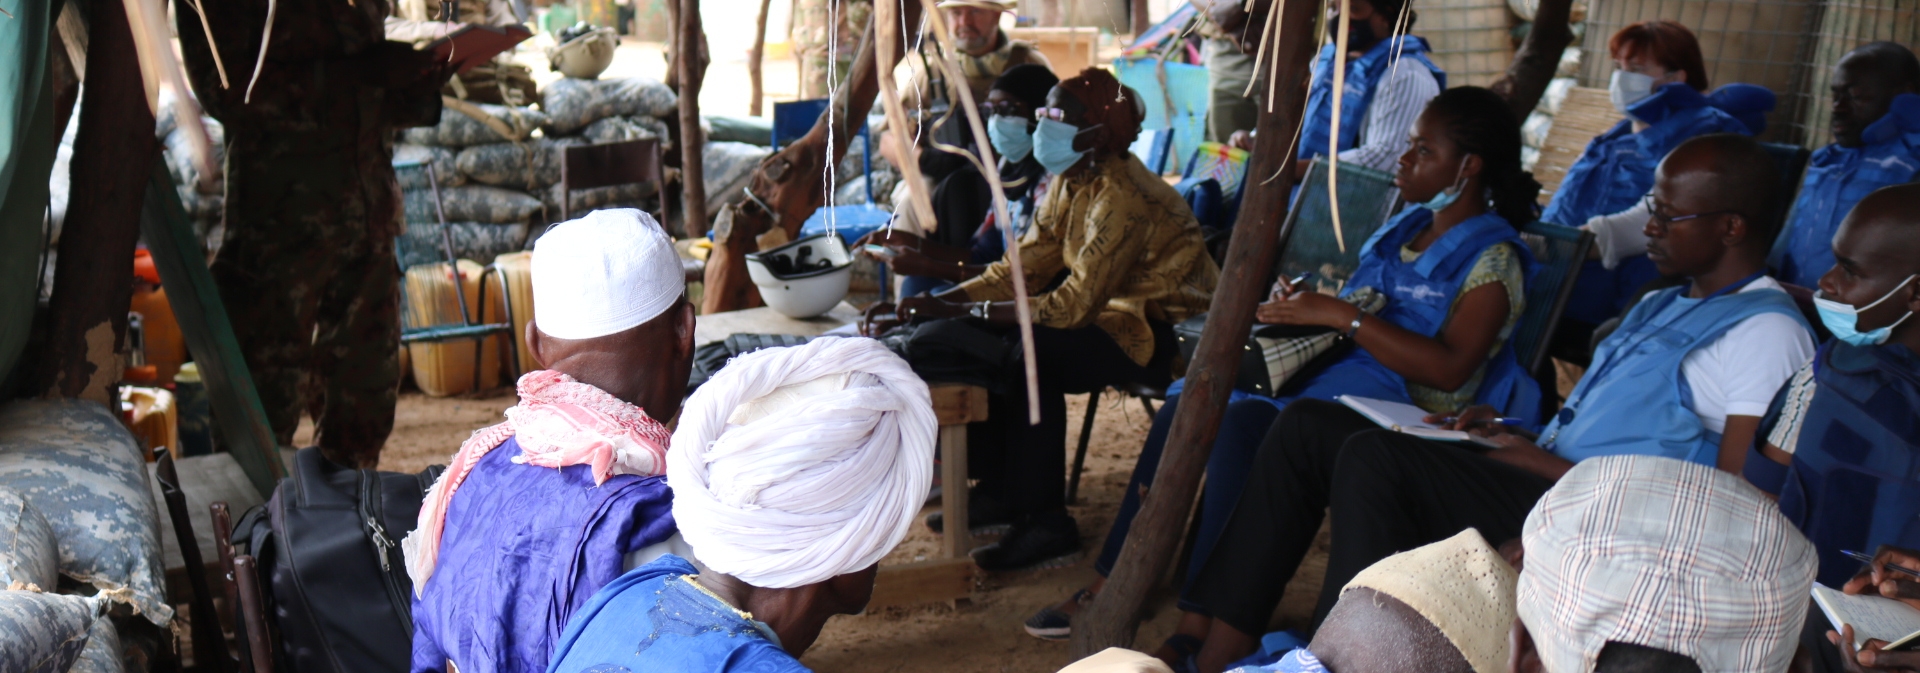 Community consultations on the identification of priority activities in Farabougou, Mali. @ IOM, 2021